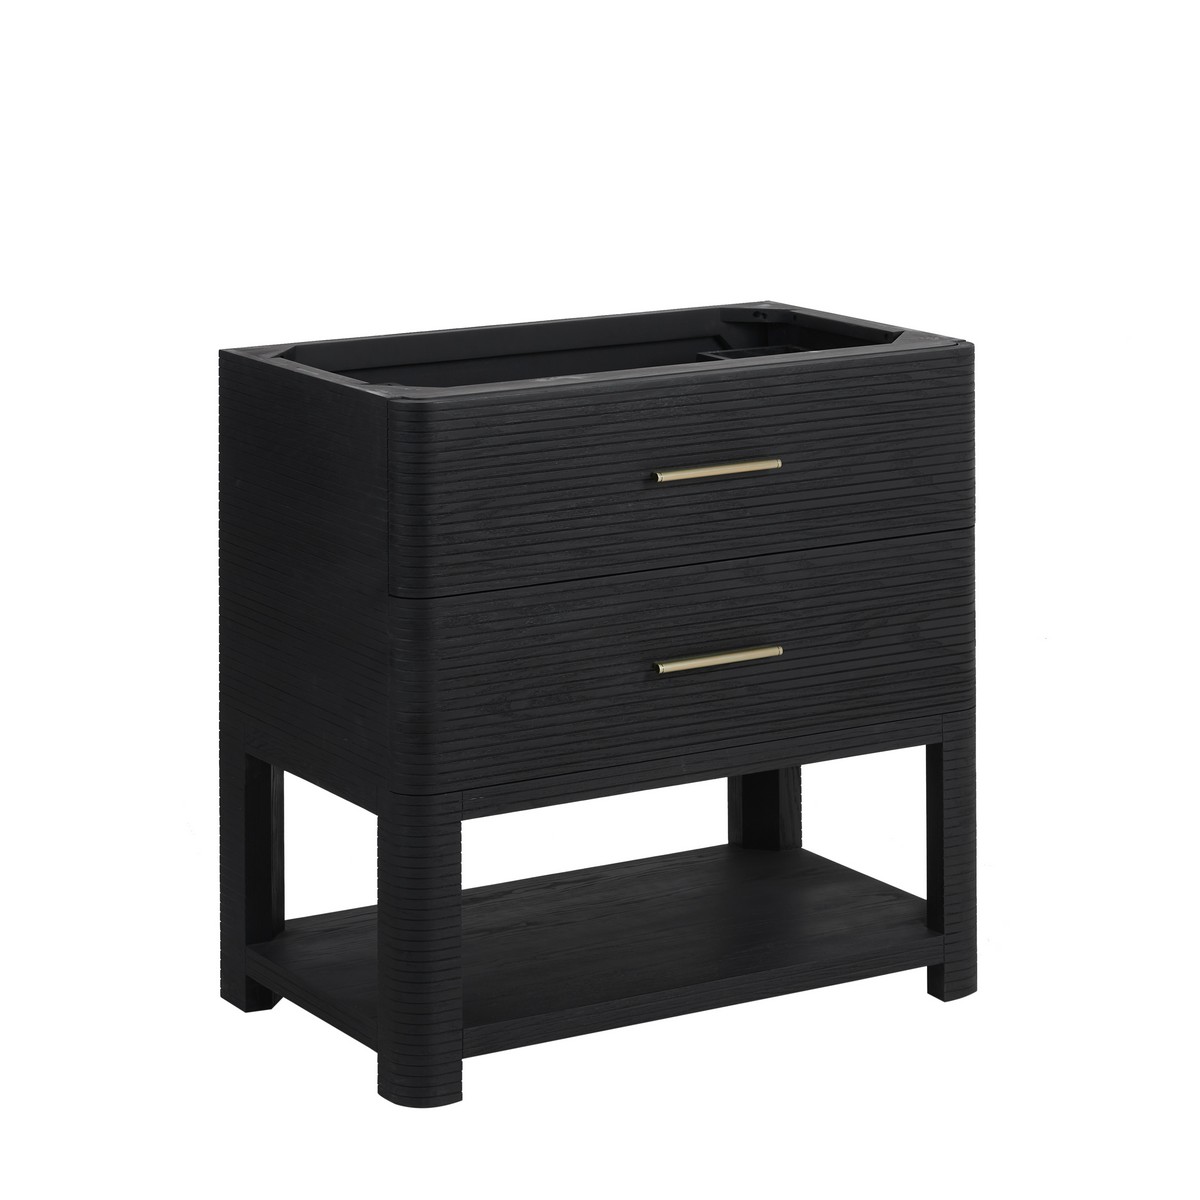 JAMES MARTIN D704-V36-CBO LUCIAN 35 3/4 INCH FREE-STANDING SINGLE SINK BATHROOM VANITY CABINET ONLY IN CARBON OAK